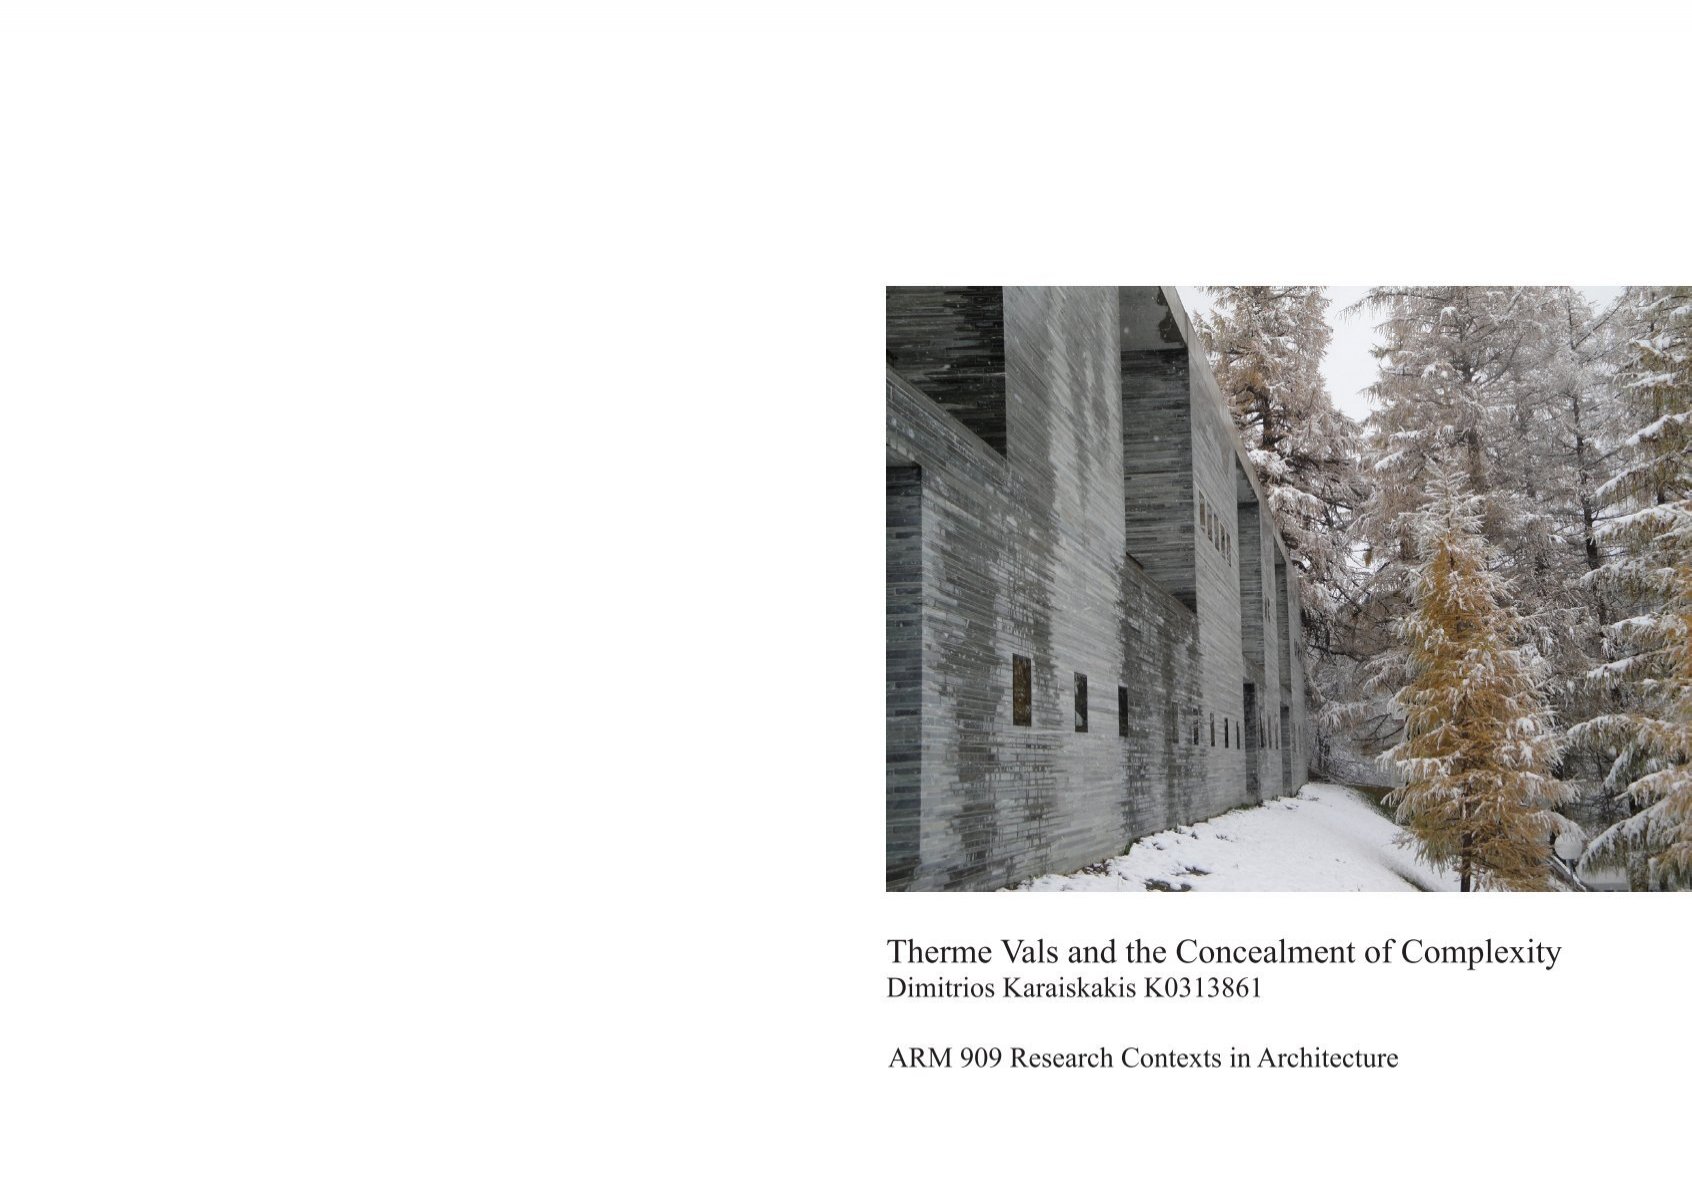 Essay on Simplicity and Complexity - Therme Vals, Peter Zumthor by